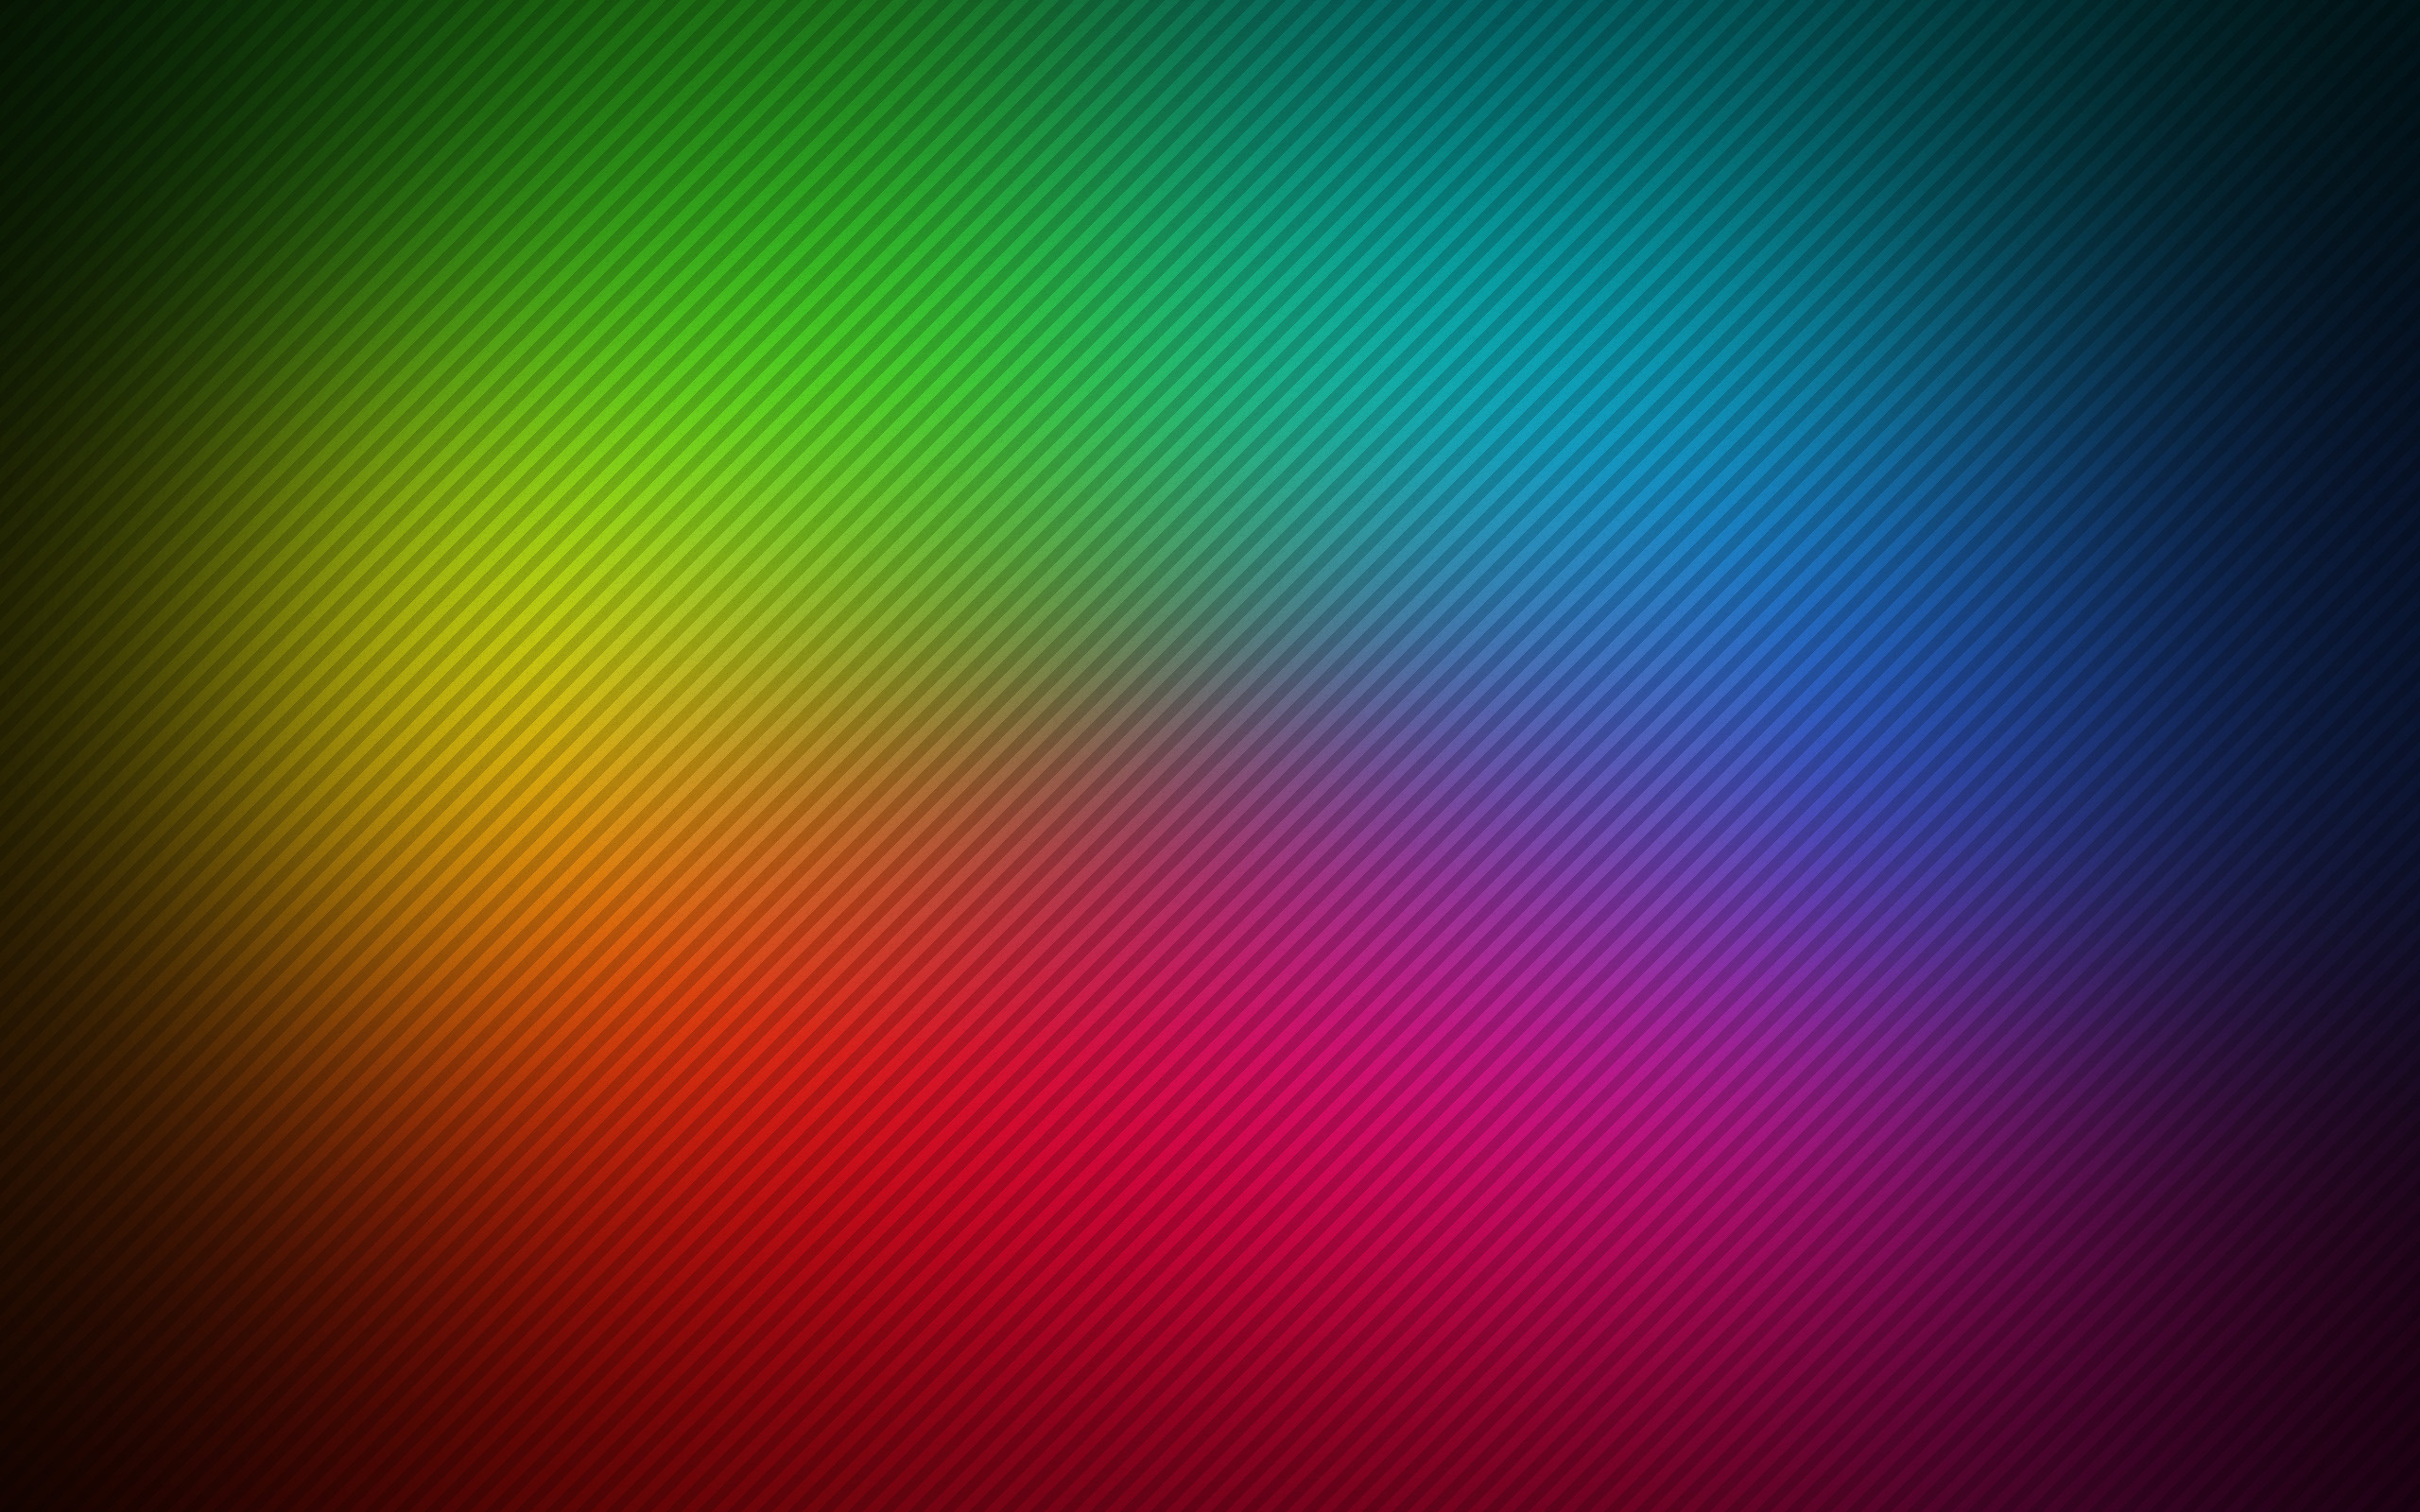 Bright Colorful Desktop Background Image Amp Pictures Becuo